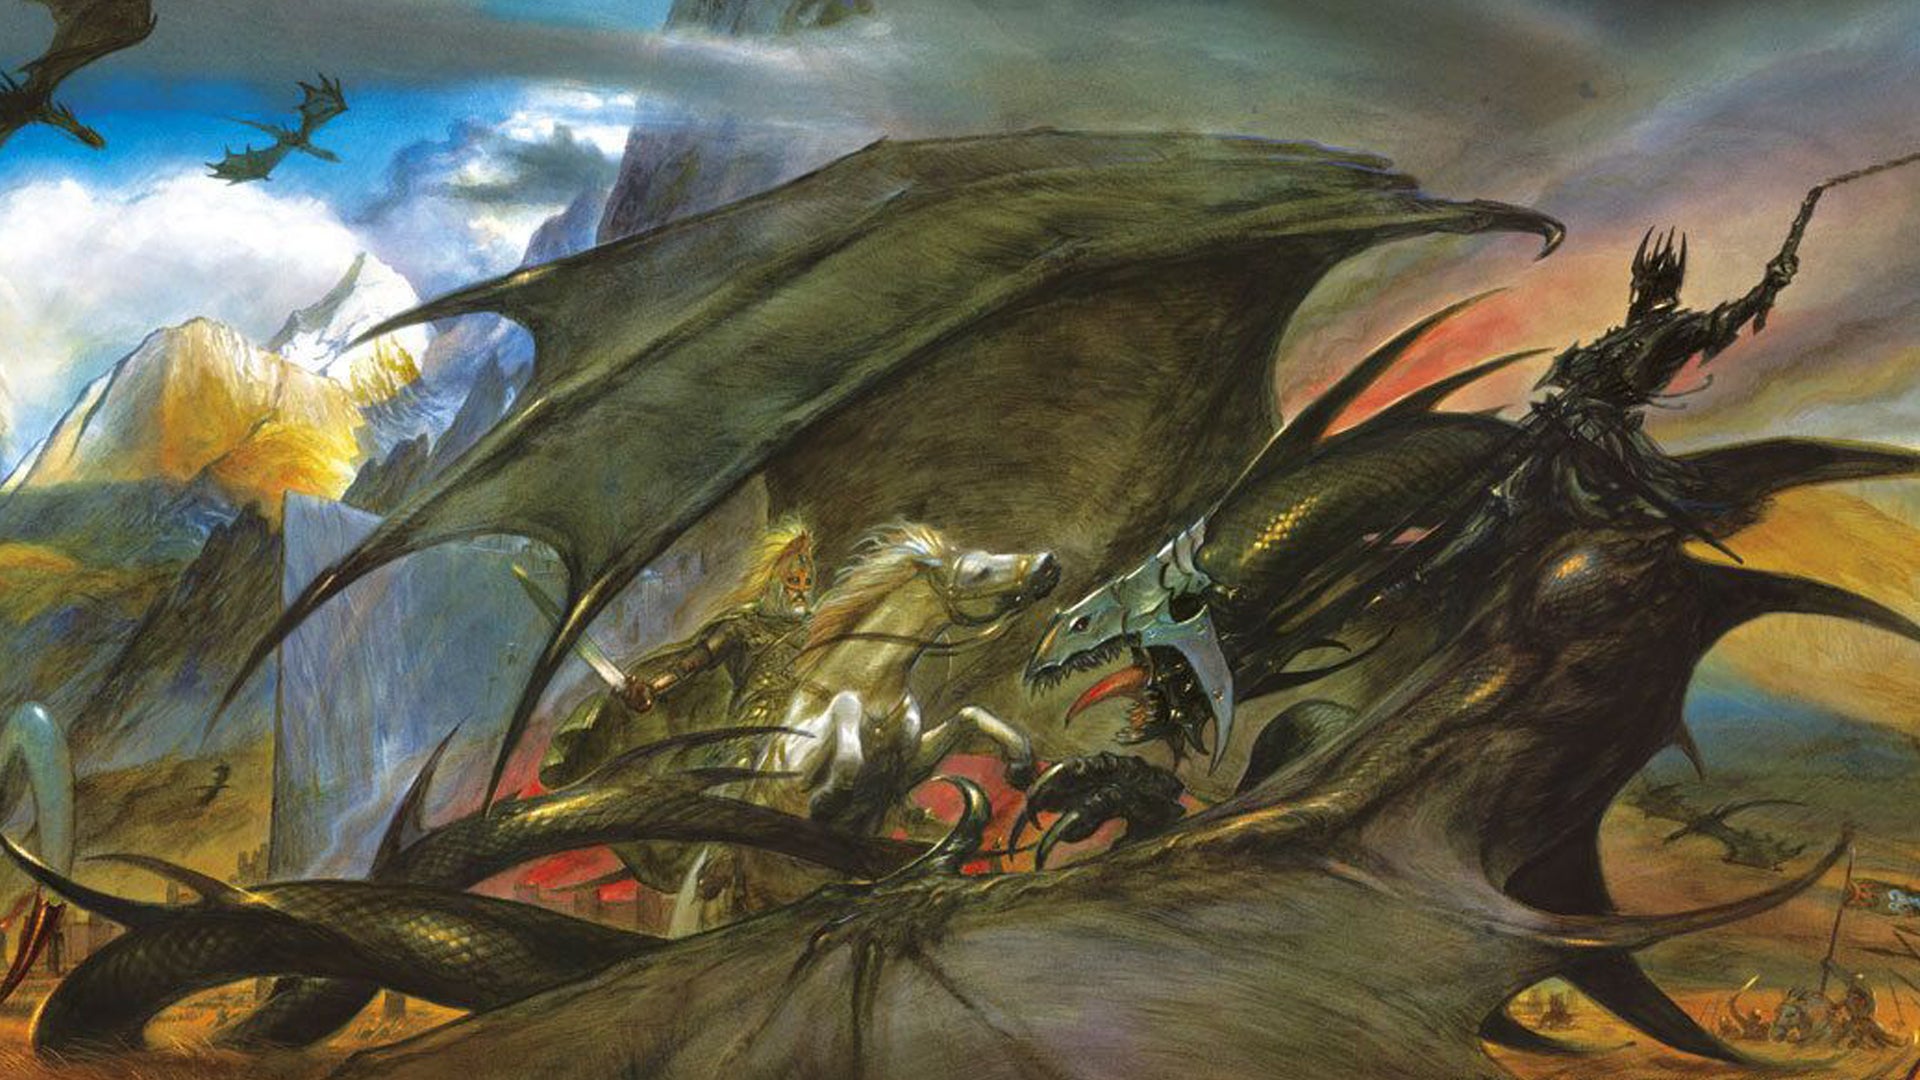 War of the Ring board game artwork